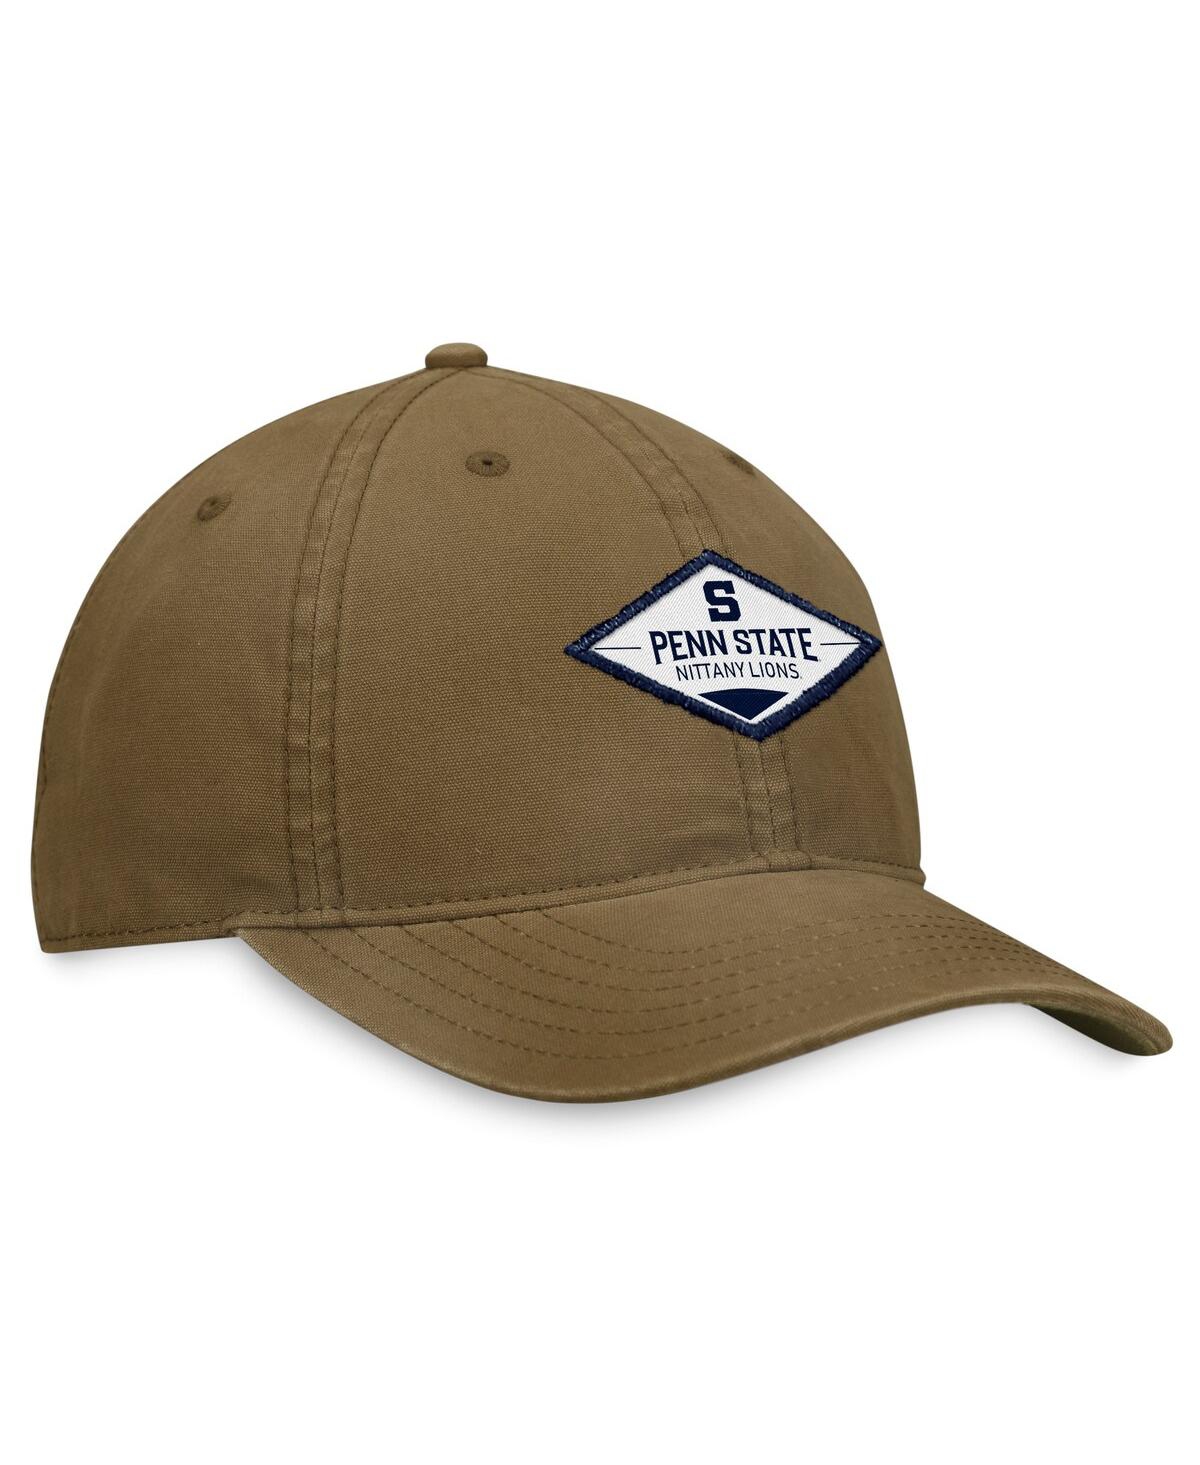 Shop Top Of The World Men's  Khaki Penn State Nittany Lions Adventure Adjustable Hat